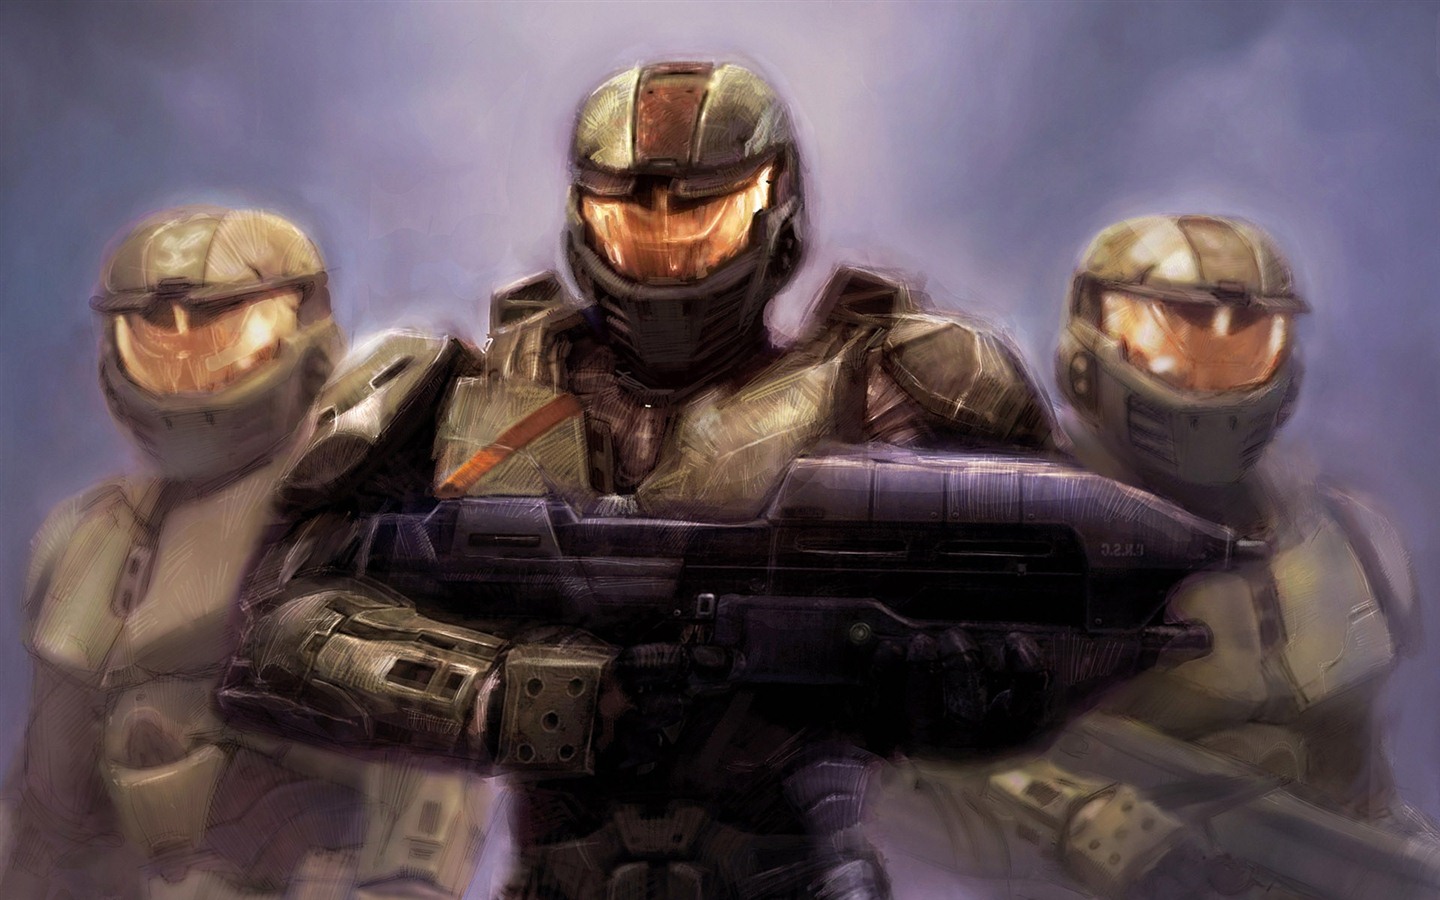 Halo game HD wallpapers #16 - 1440x900